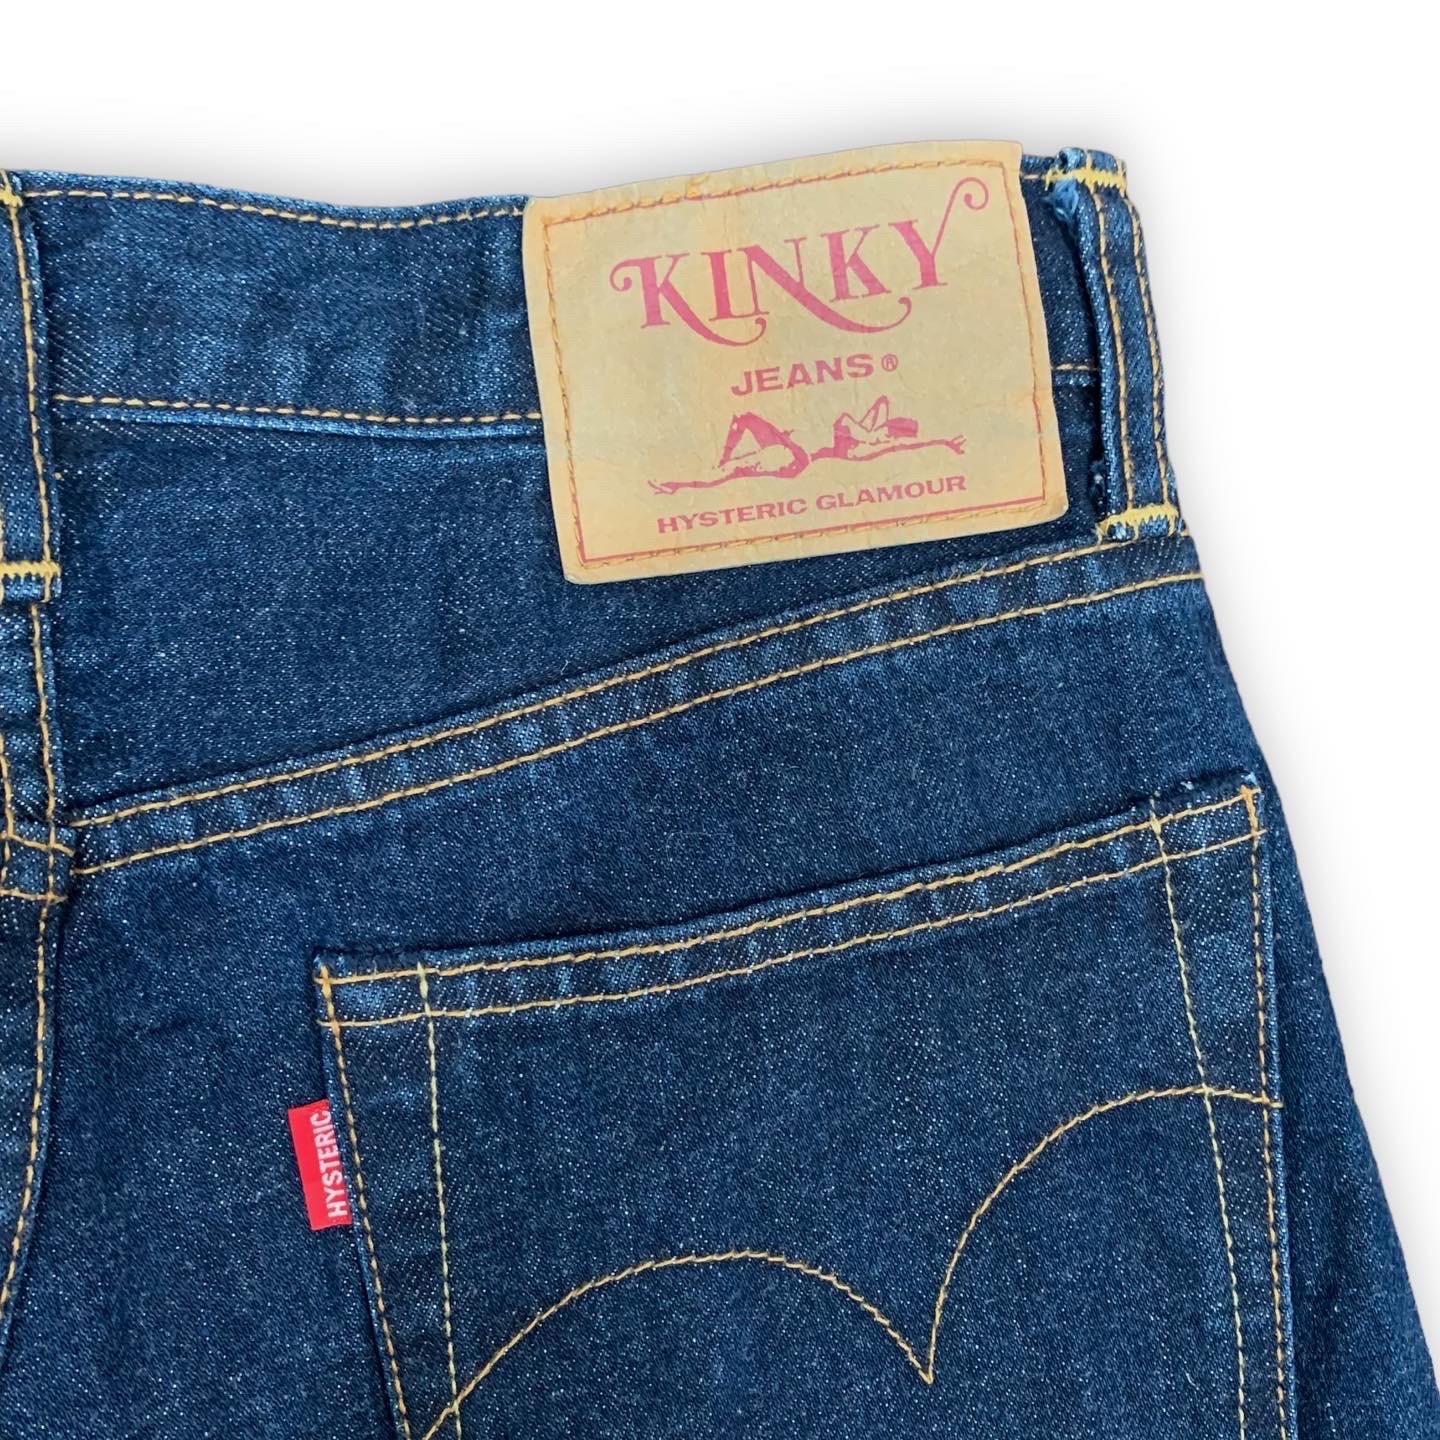 HYSTERIC GLAMOUR"  KINKY JEANS